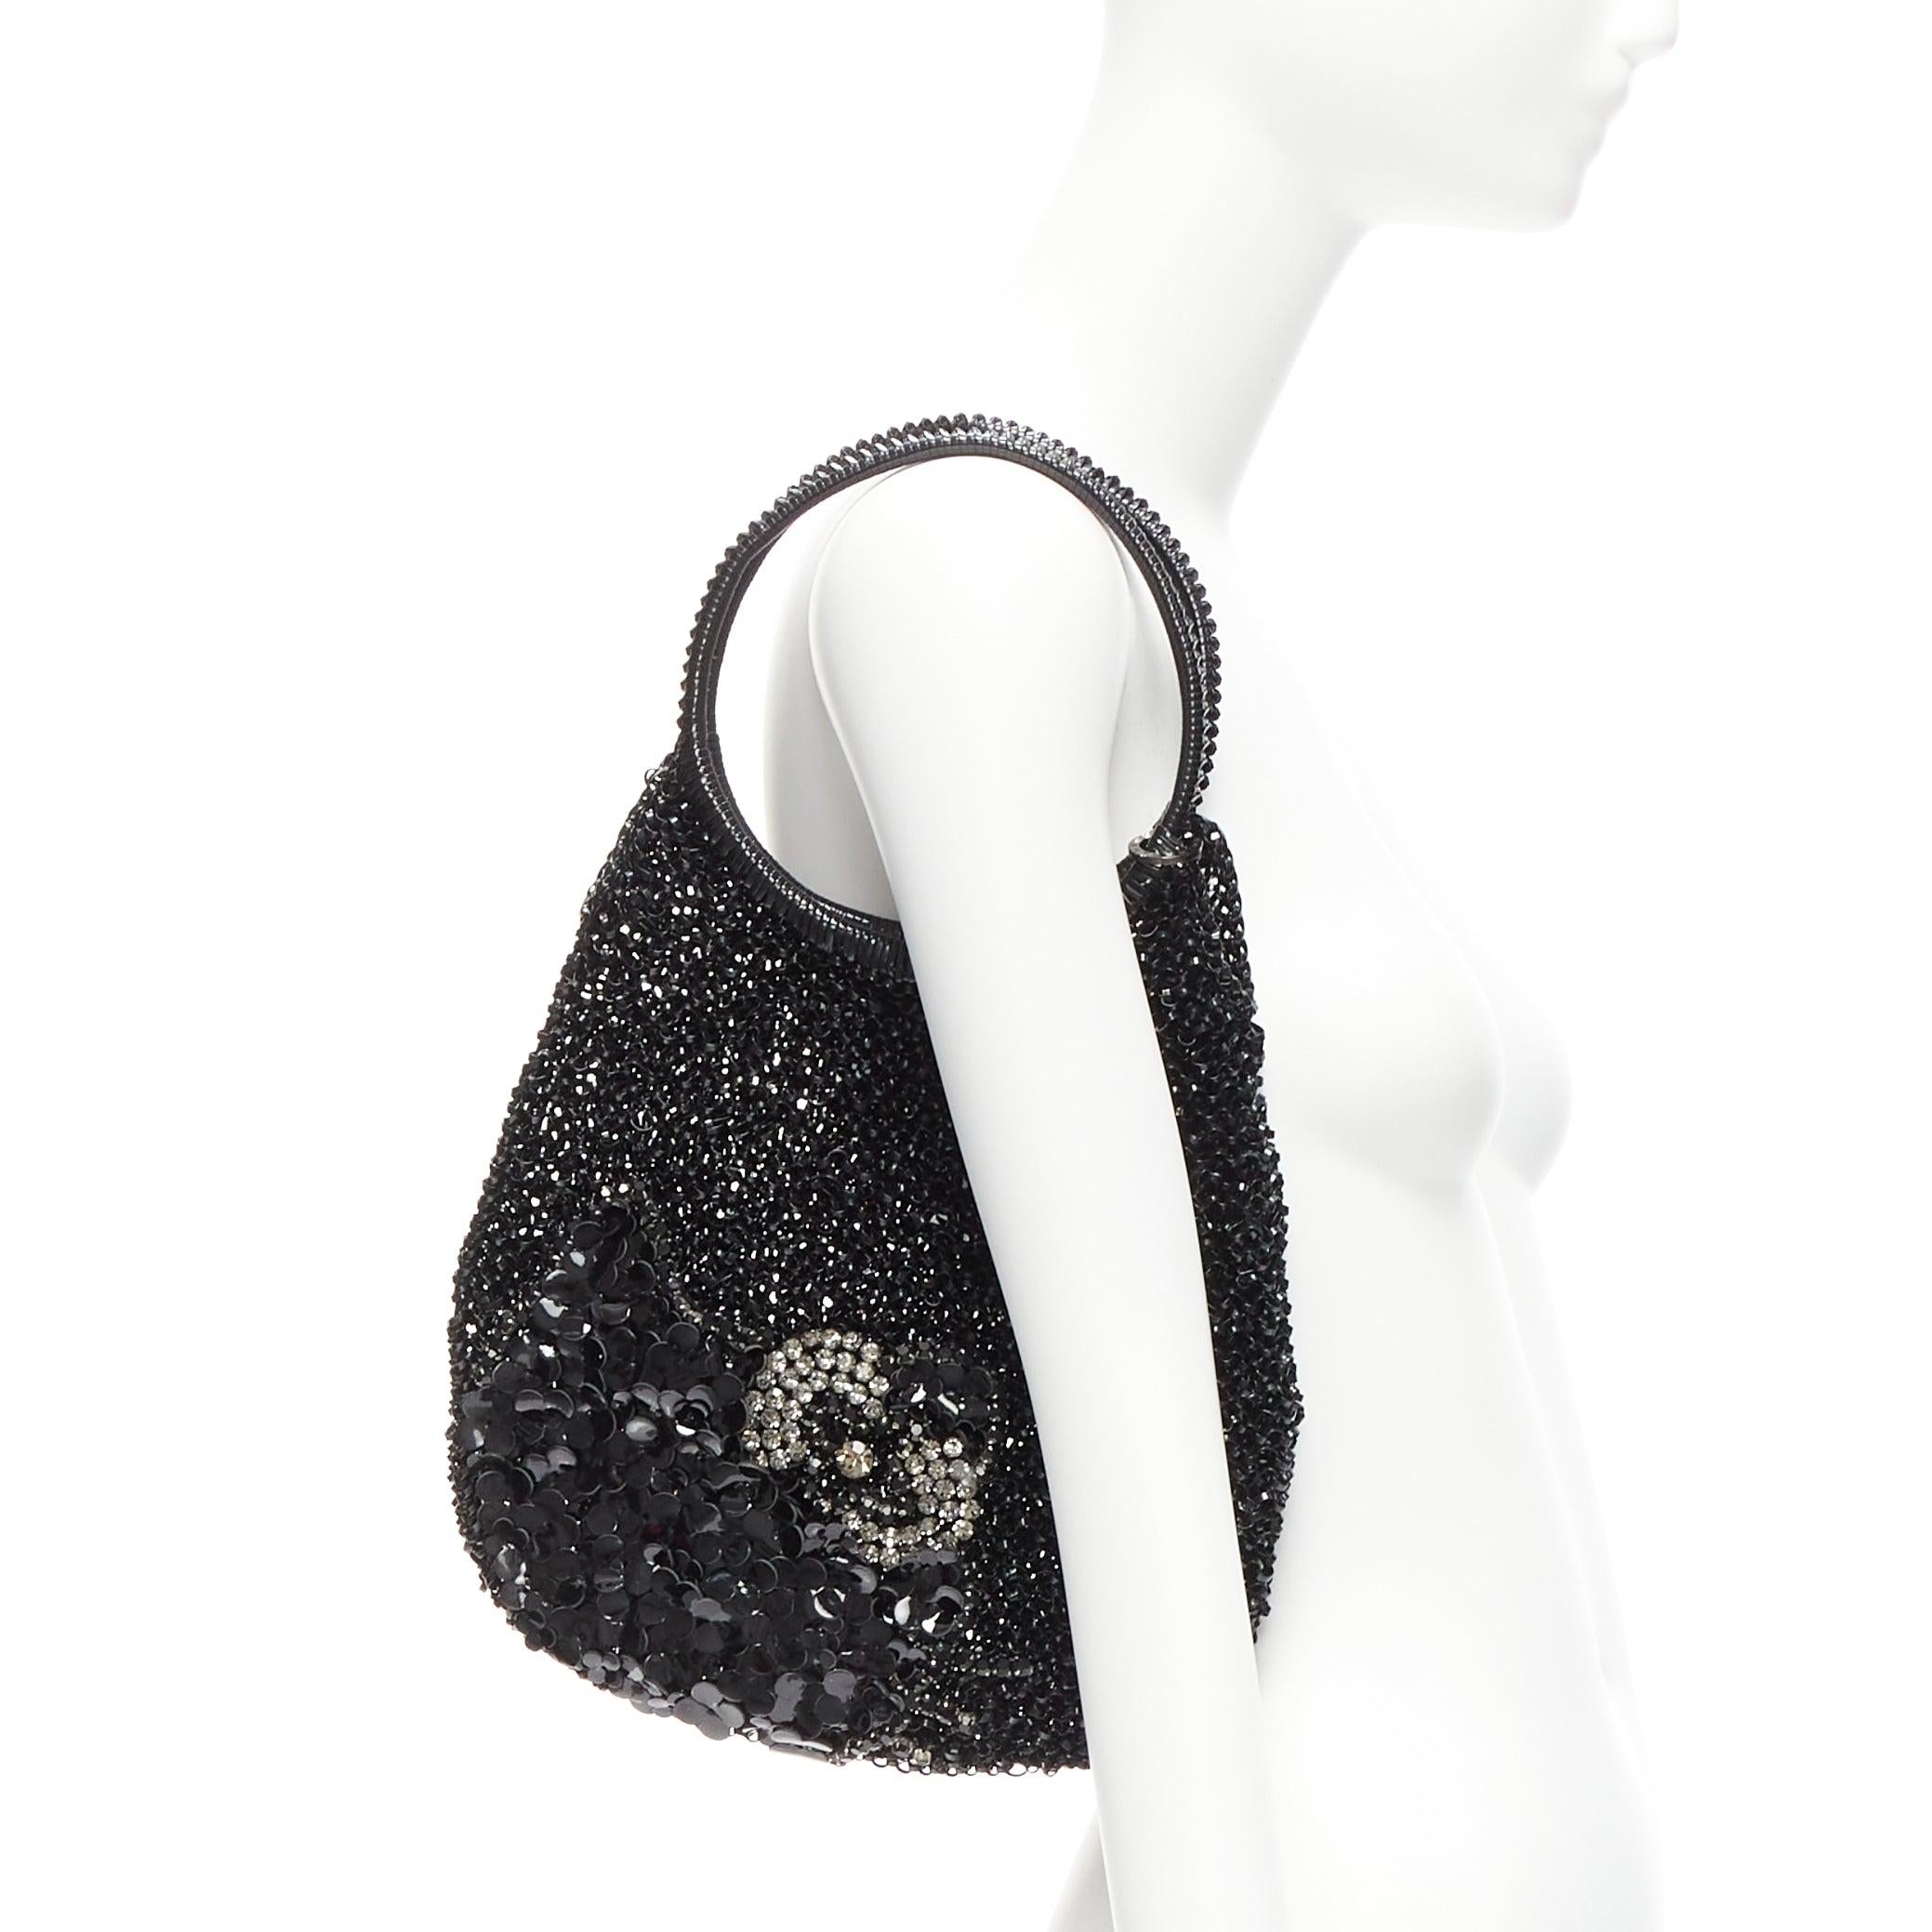 ANTEPRIMA HELLO KITTY Wire Bag black crystal leather sequin teardrop tote
Reference: ANWU/A01069
Brand: Anteprima
Collection: Wire Bag
Material: Plastic
Color: Black, Clear
Pattern: Solid
Extra Details: Clear crystal and black leather sequins Hello